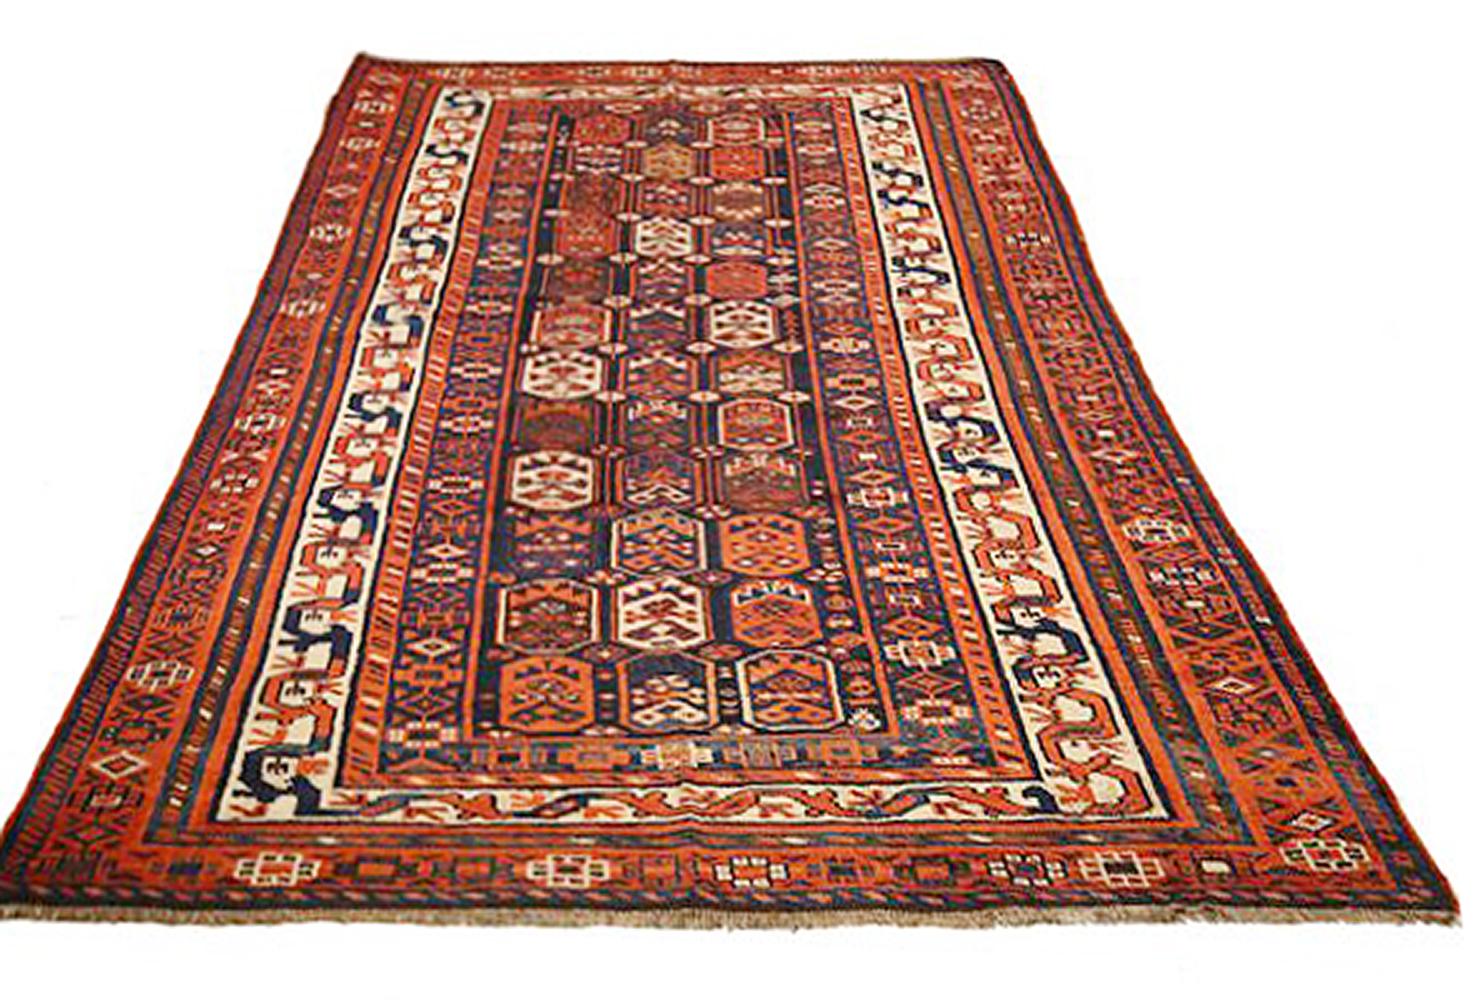 Antique Persian rug handwoven from the finest sheep’s wool and colored with all-natural vegetable dyes that are safe for humans and pets. It’s a traditional Shiraz design featuring ivory and navy geometric details over a mix of rust and navy field.